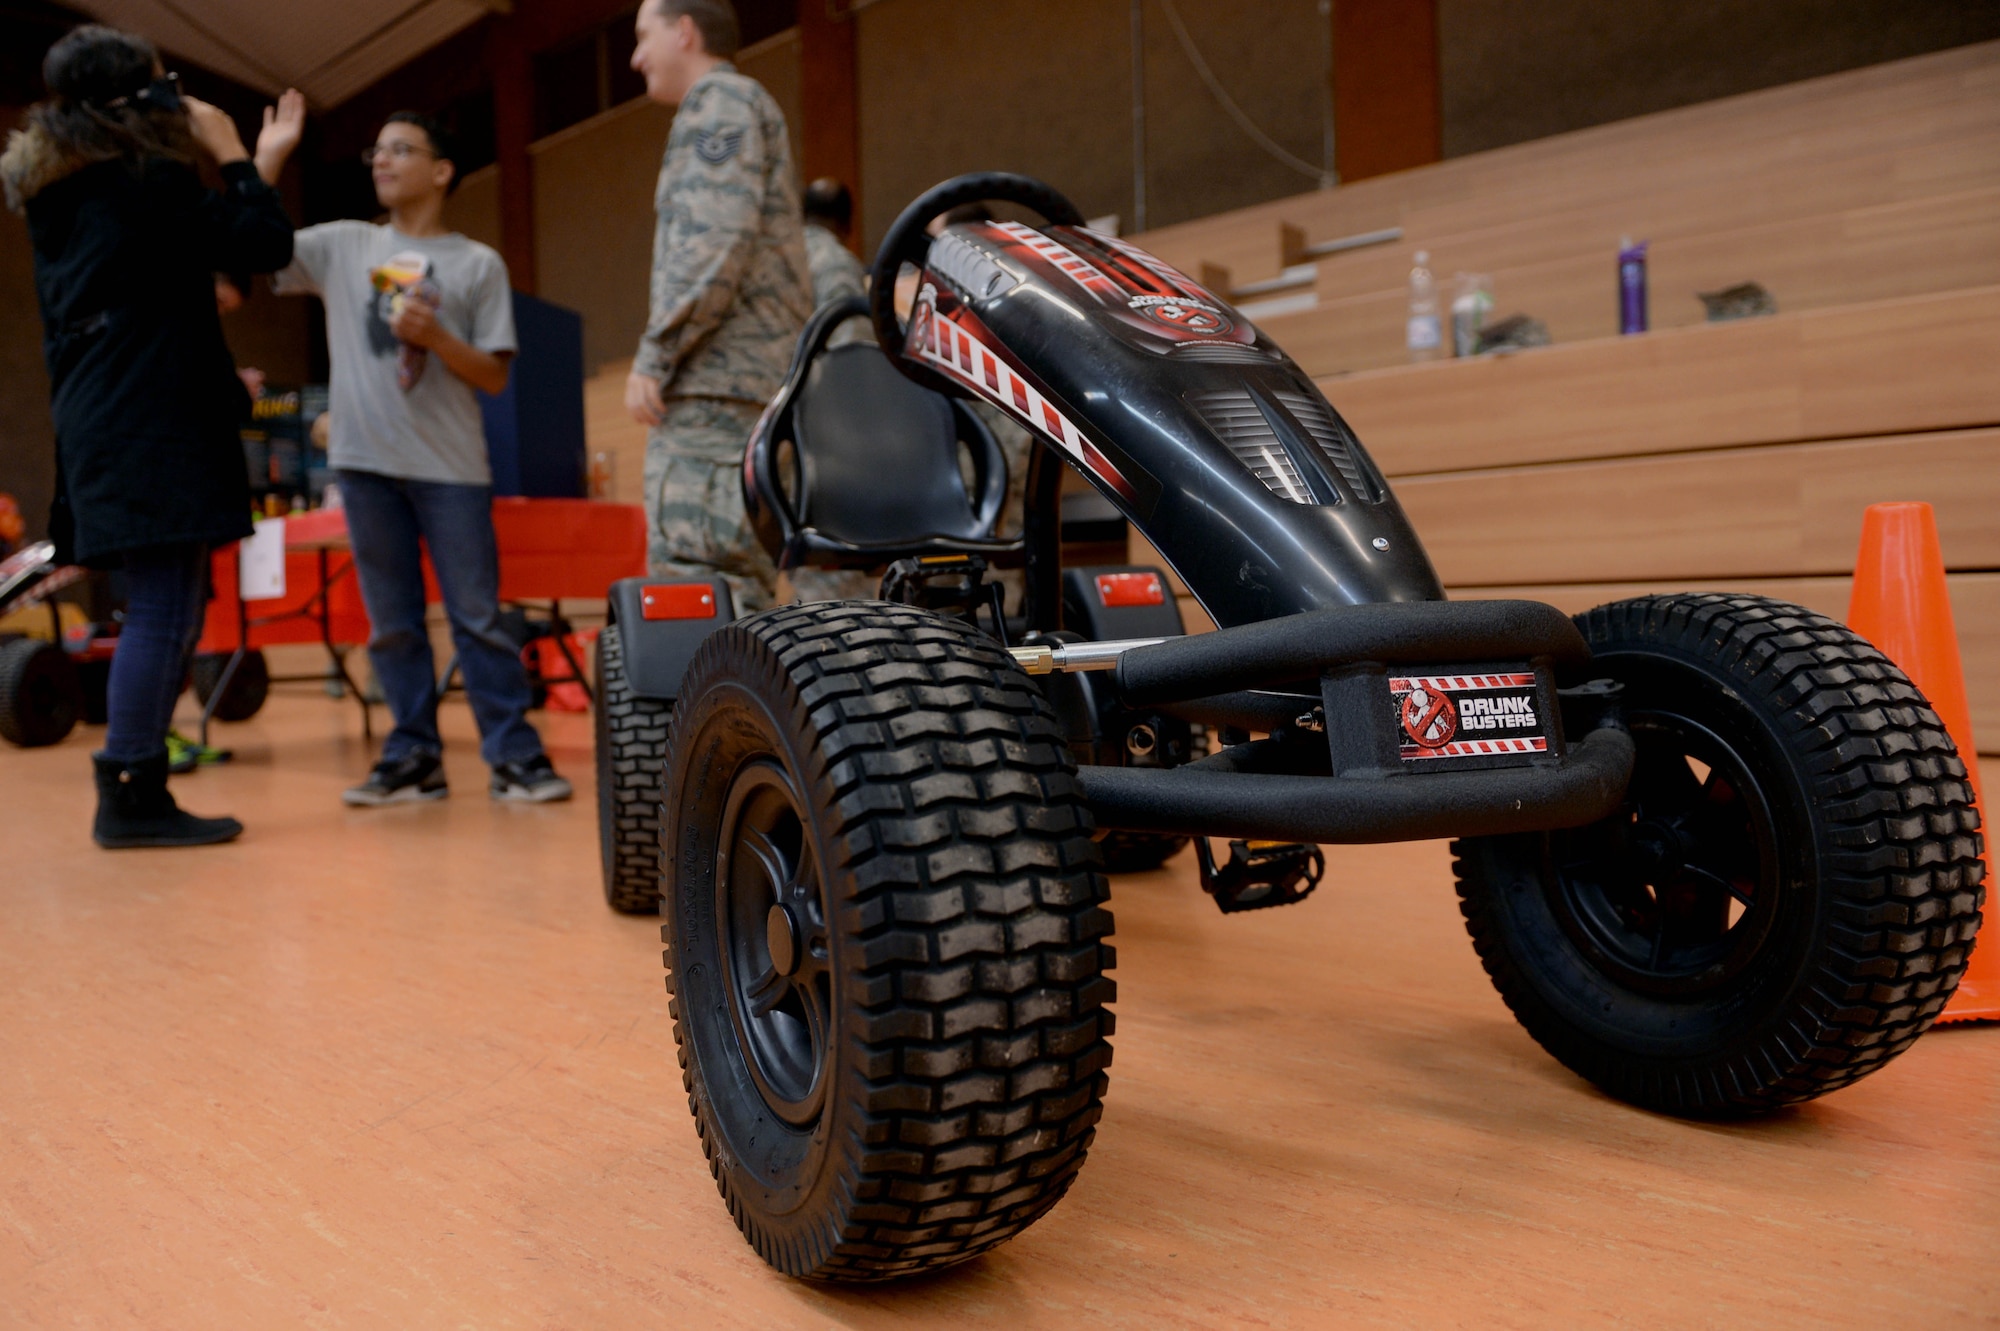 A “Drunk Busters” bike sits on a makeshift driving course during the 2014 Fall Harvest Health Fair at the Skelton Memorial Fitness Center at Spangdahlem Air Base, Germany, Nov. 5, 2014. The 52nd Medical Operations Squadron’s Alcohol and Drug Abuse and Treatment center put together the course to simulate the effects of “driving” while intoxicated. (U.S. Air Force photo by Airman 1st Class Timothy Kim/Released)